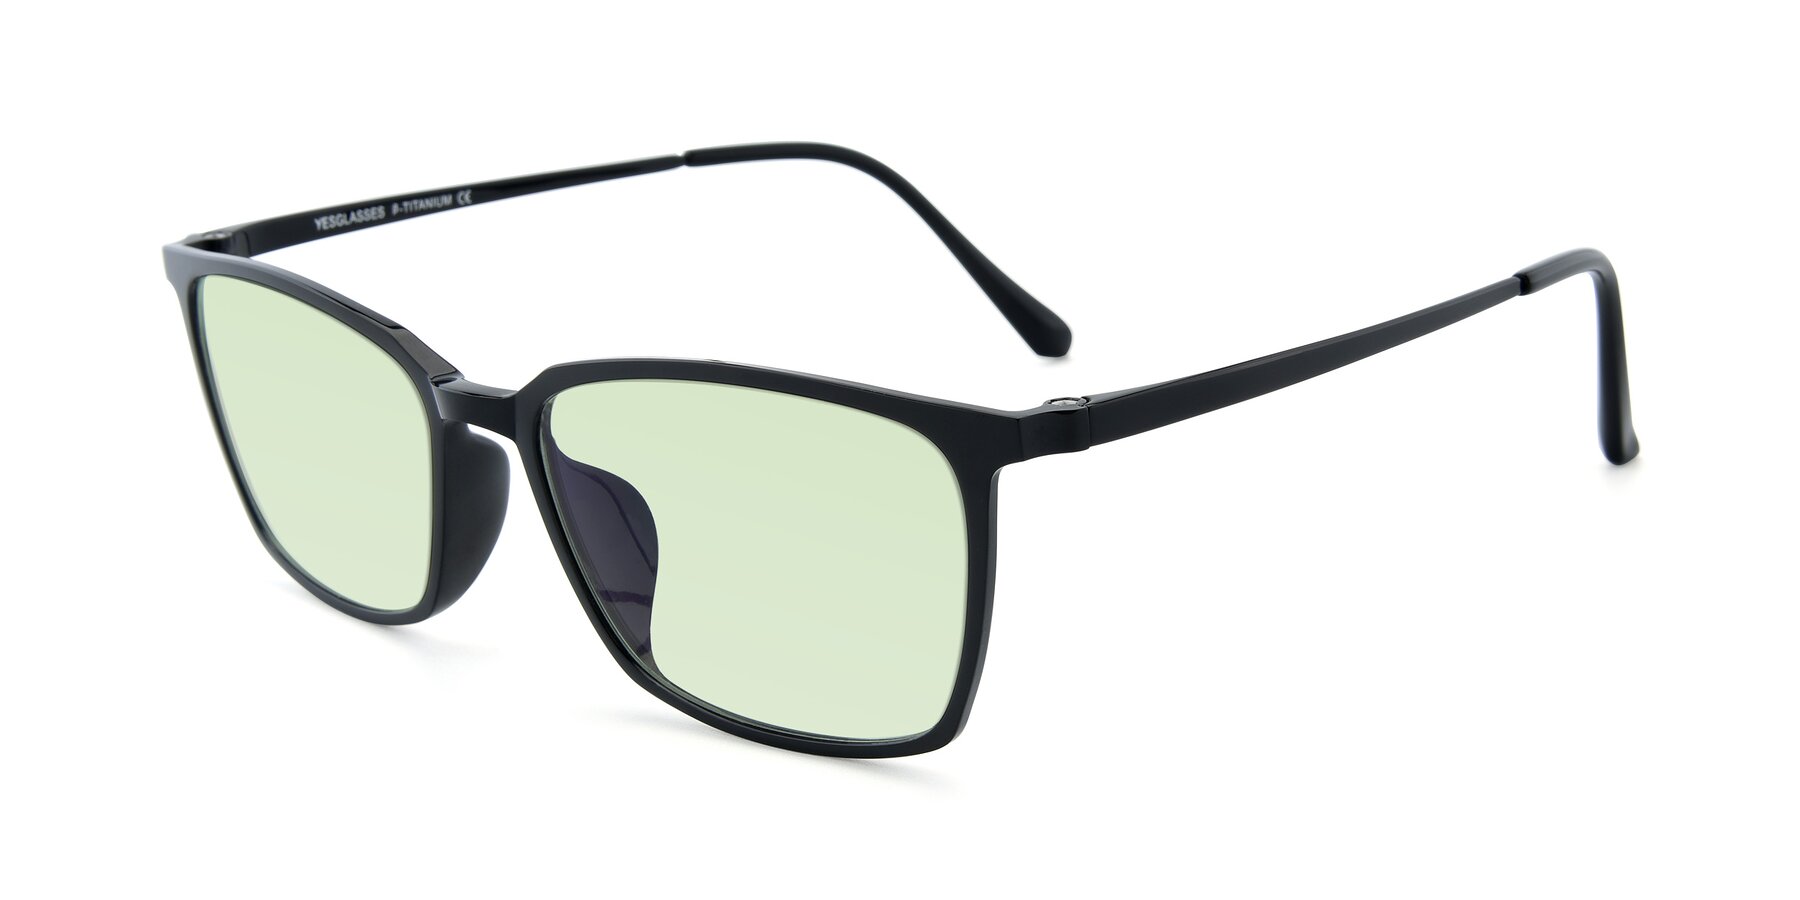 Angle of XC-5009 in Black with Light Green Tinted Lenses